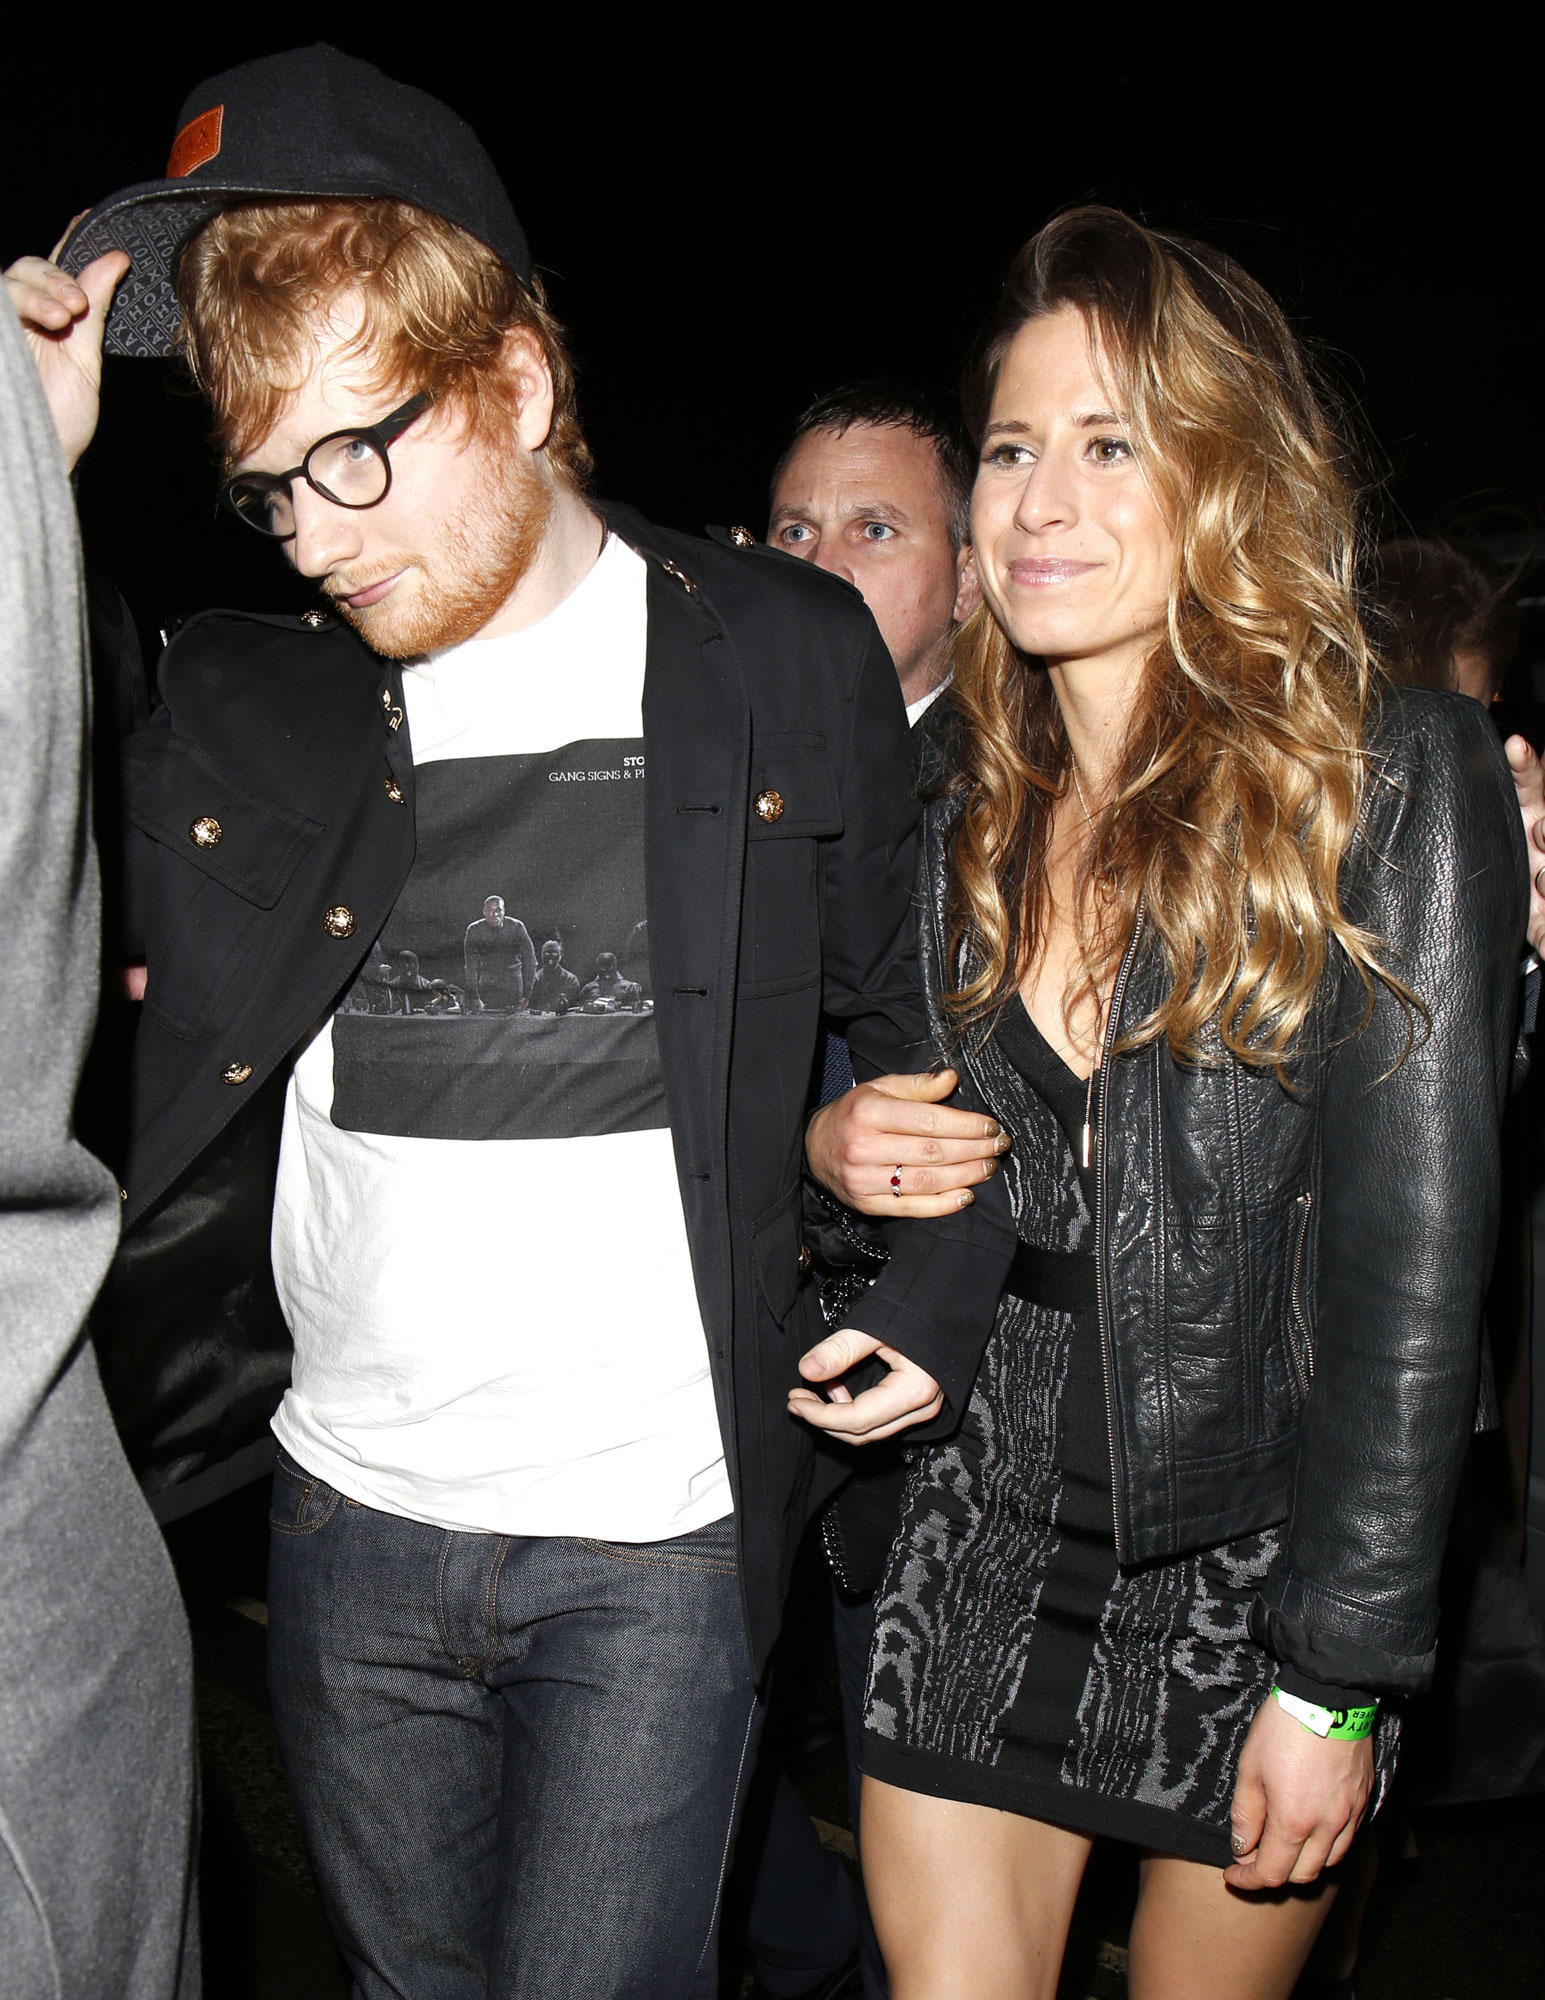 Ed Sheeran and Wife Cherry Seaborn Secretly Welcome 2nd Child a Baby Girl